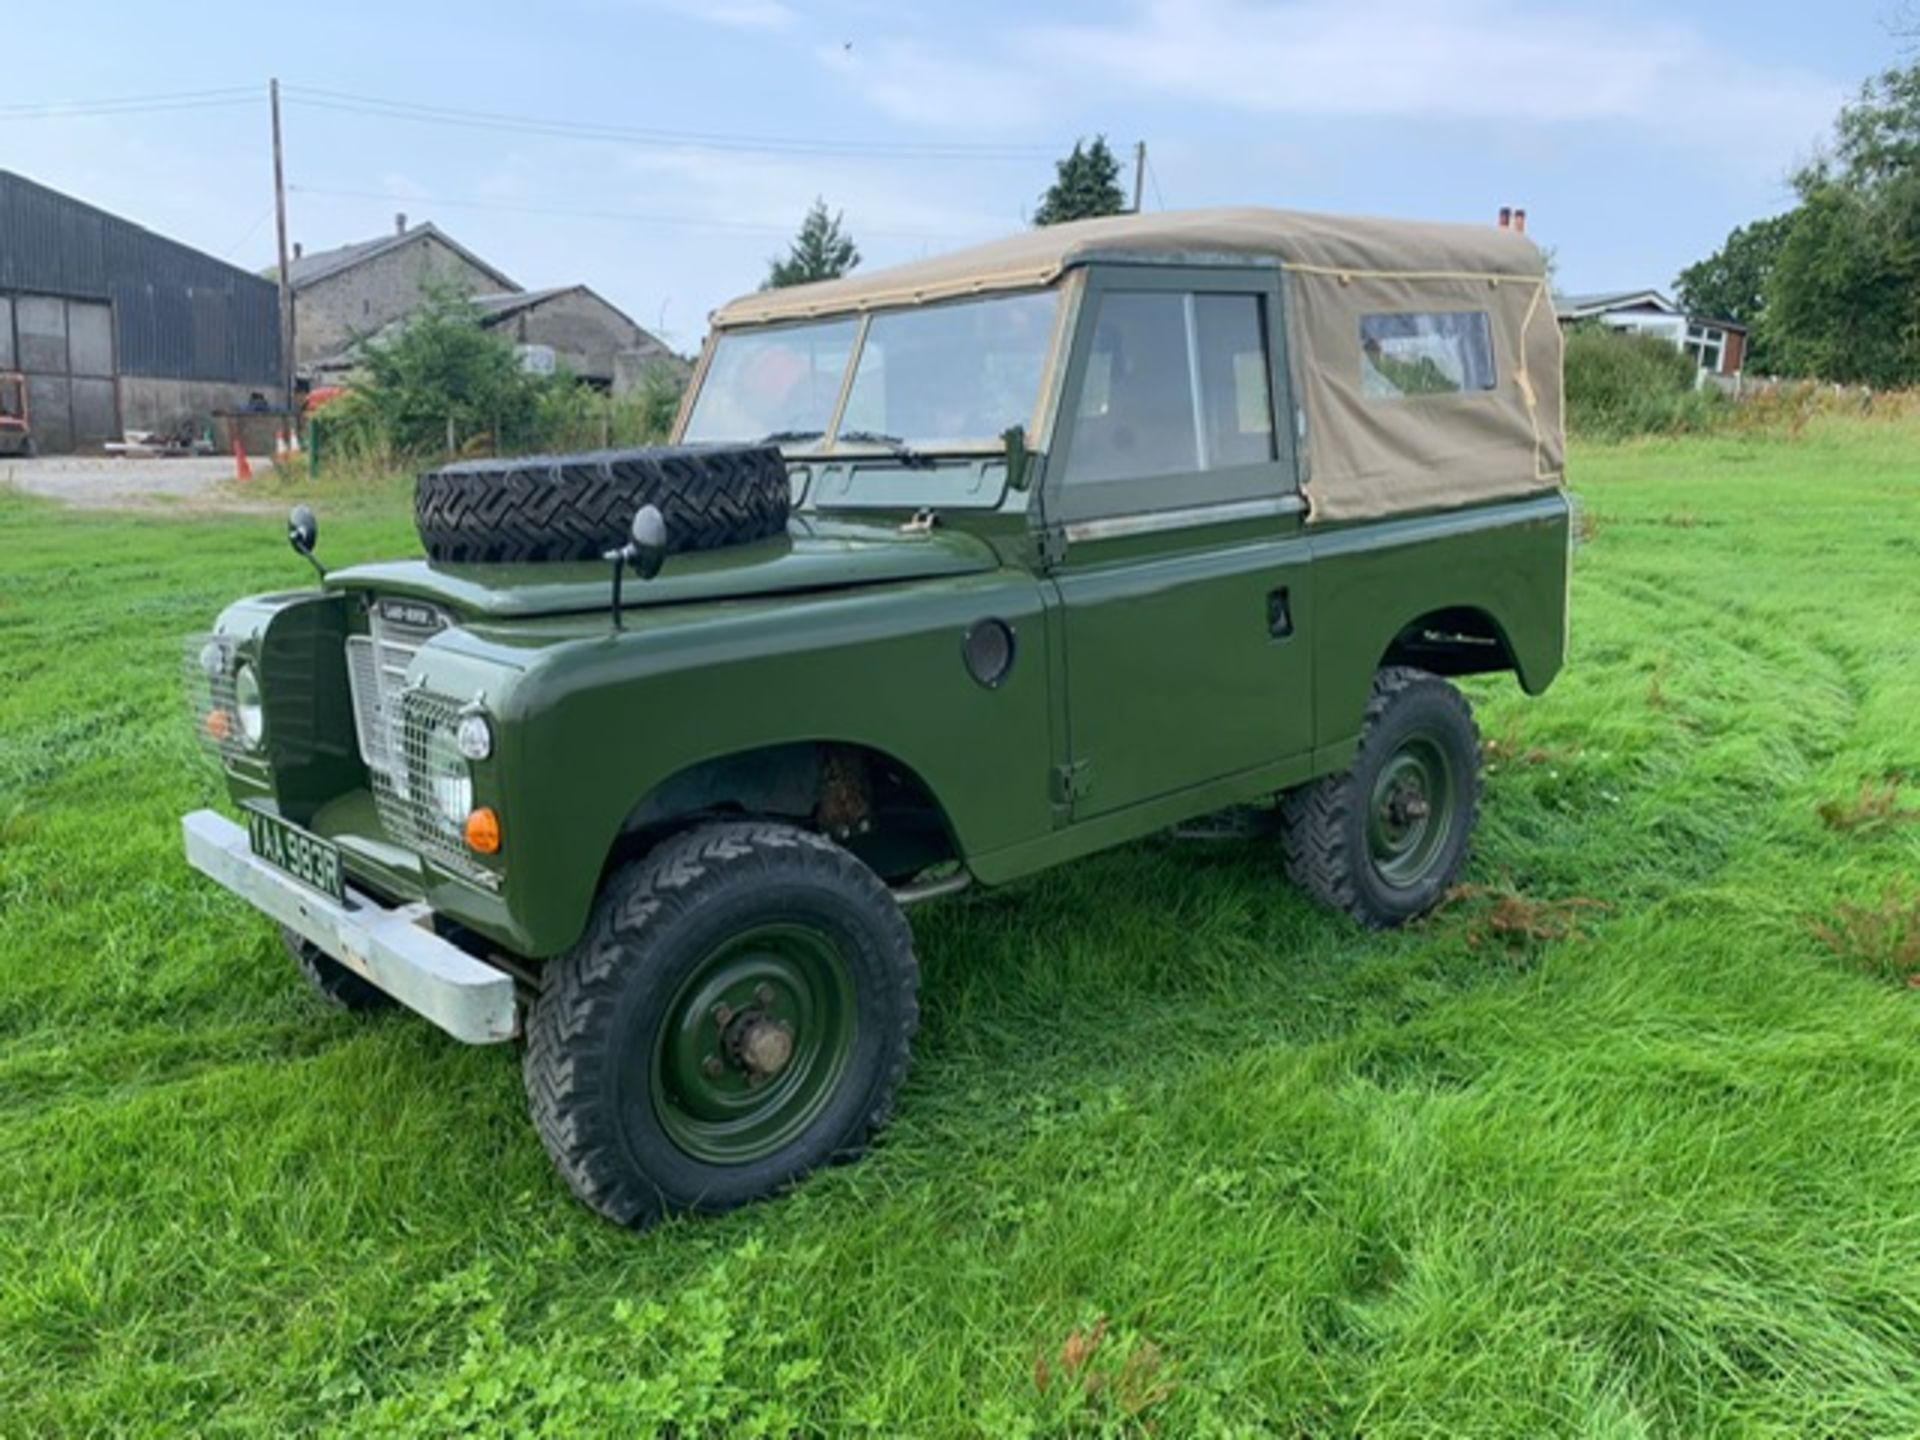 1977 Land Rover Series 3 PETROL 4X4 LIGHT UTILITY VEHICLE, registration no. YAA 983R, date first